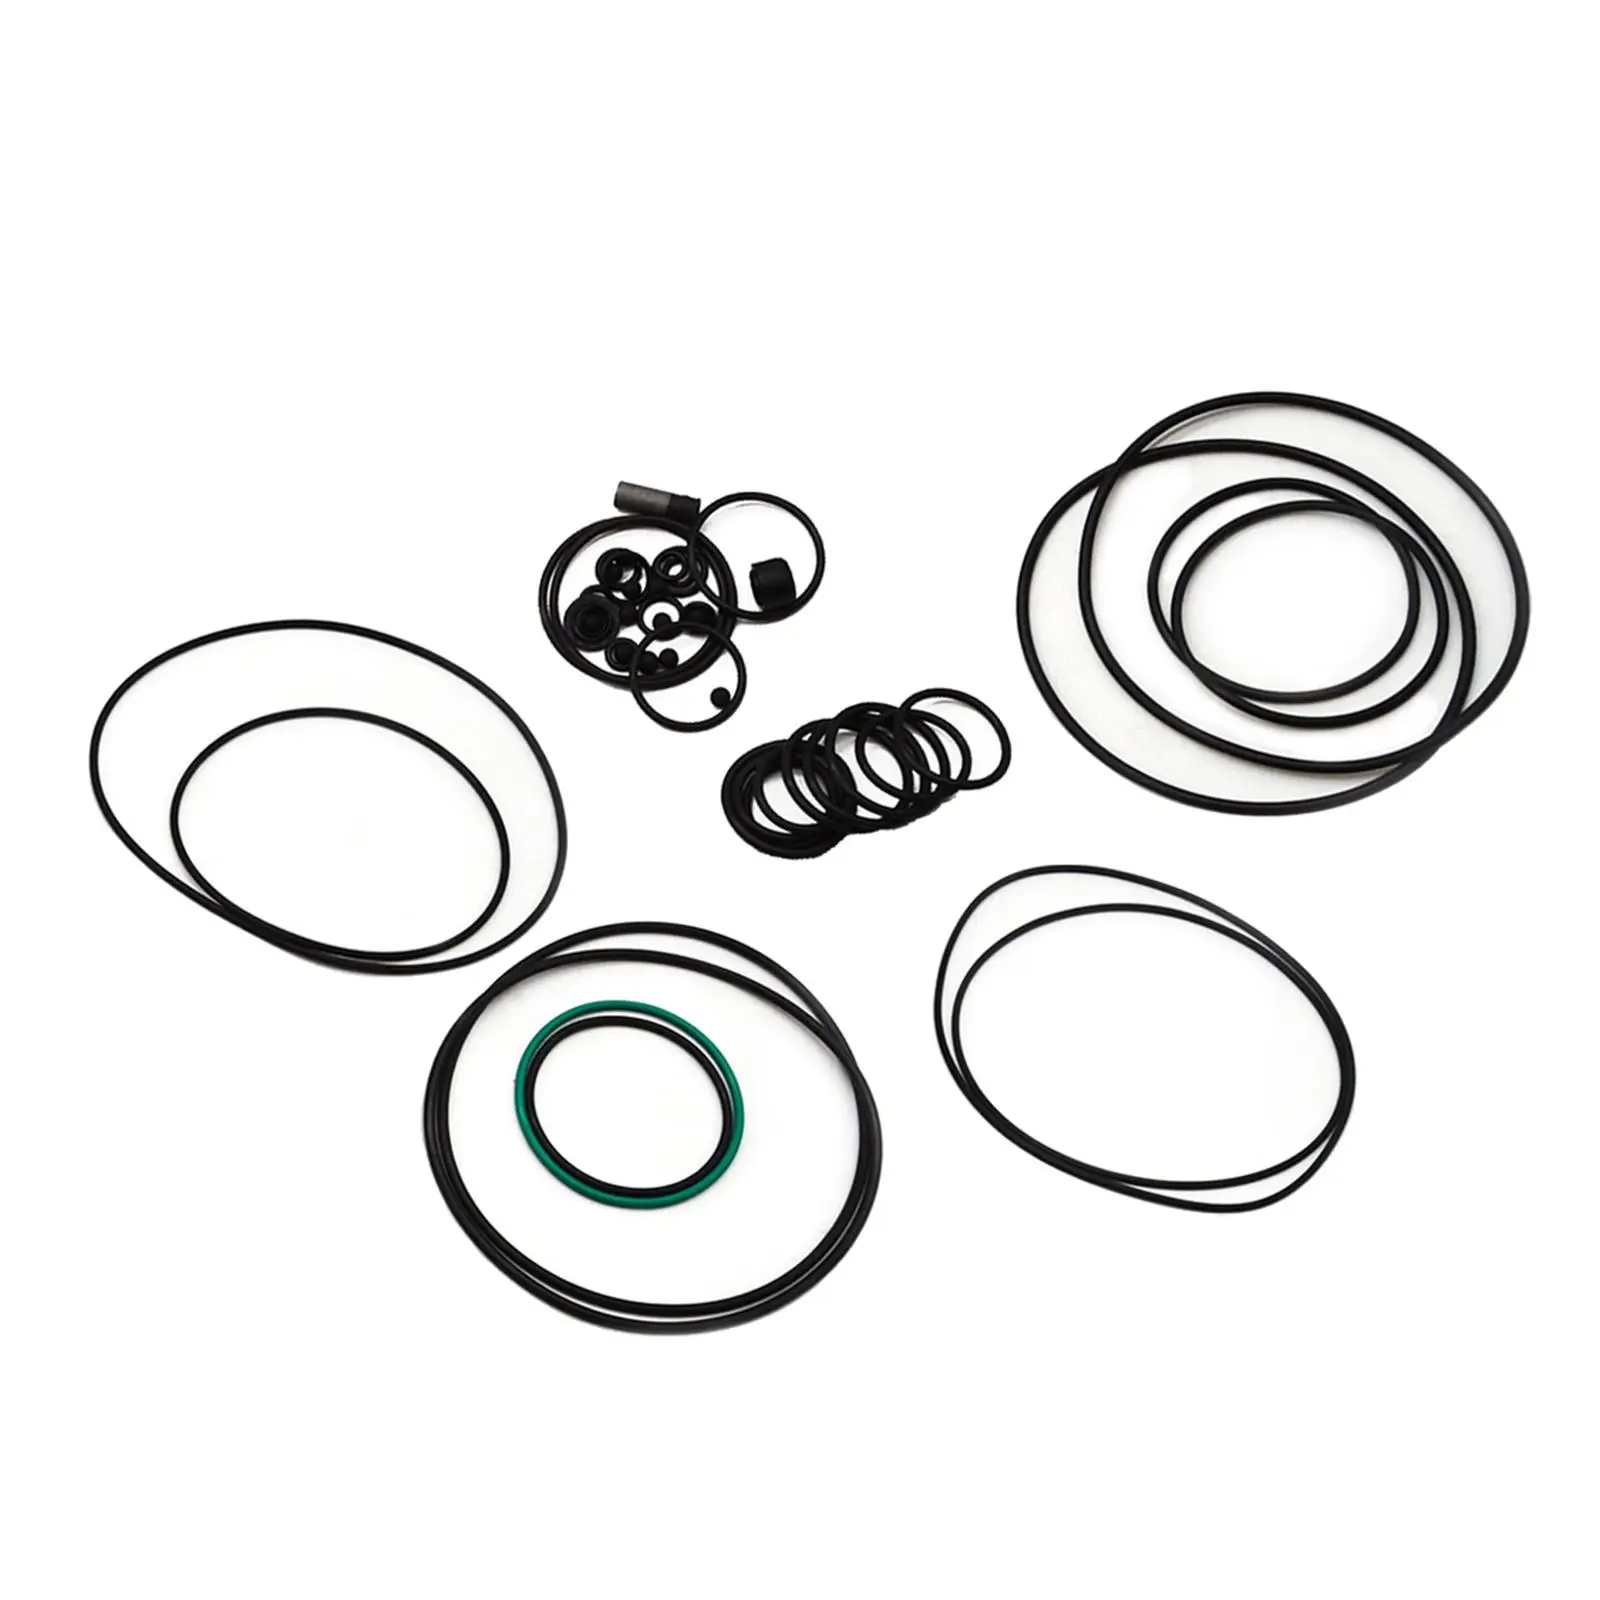 Overhaul  Kit Gaskets  Pistons Accessories Fit for           